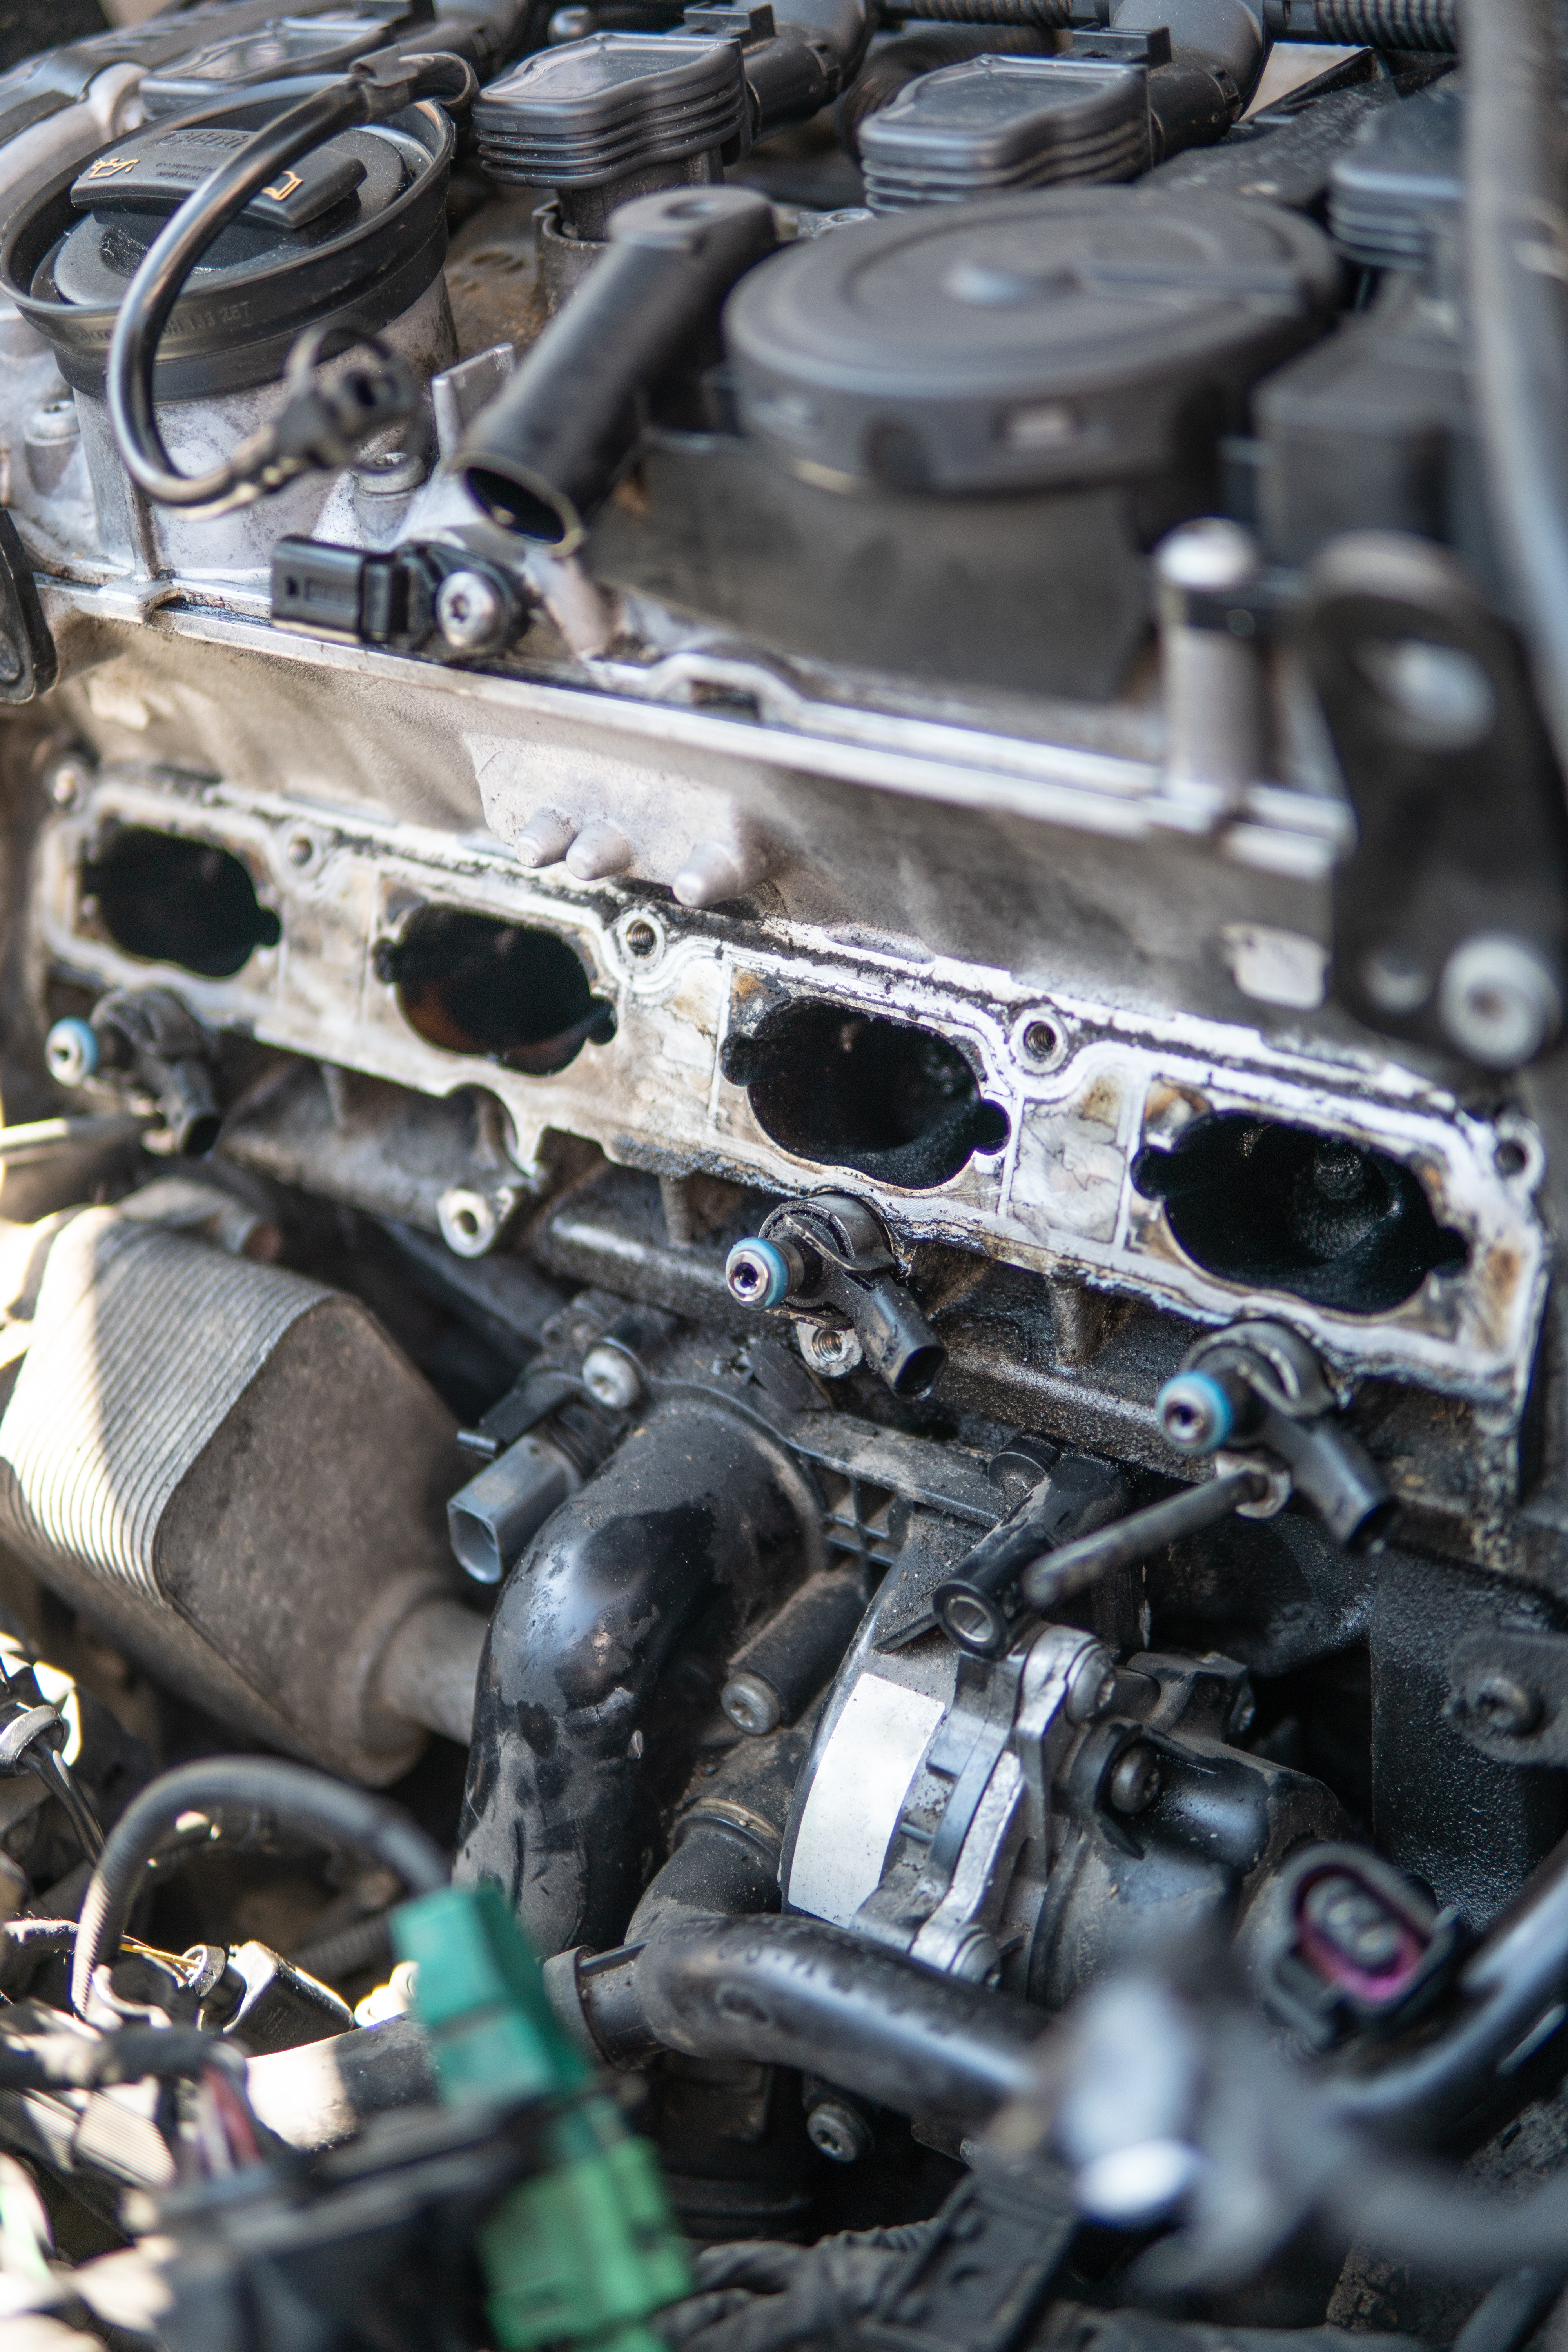 An image of a dirty intake manifold but DPF Alternatives can help with our expert intake manifold cleaning service in Dalhart, Amarillo & Pampa, TX.